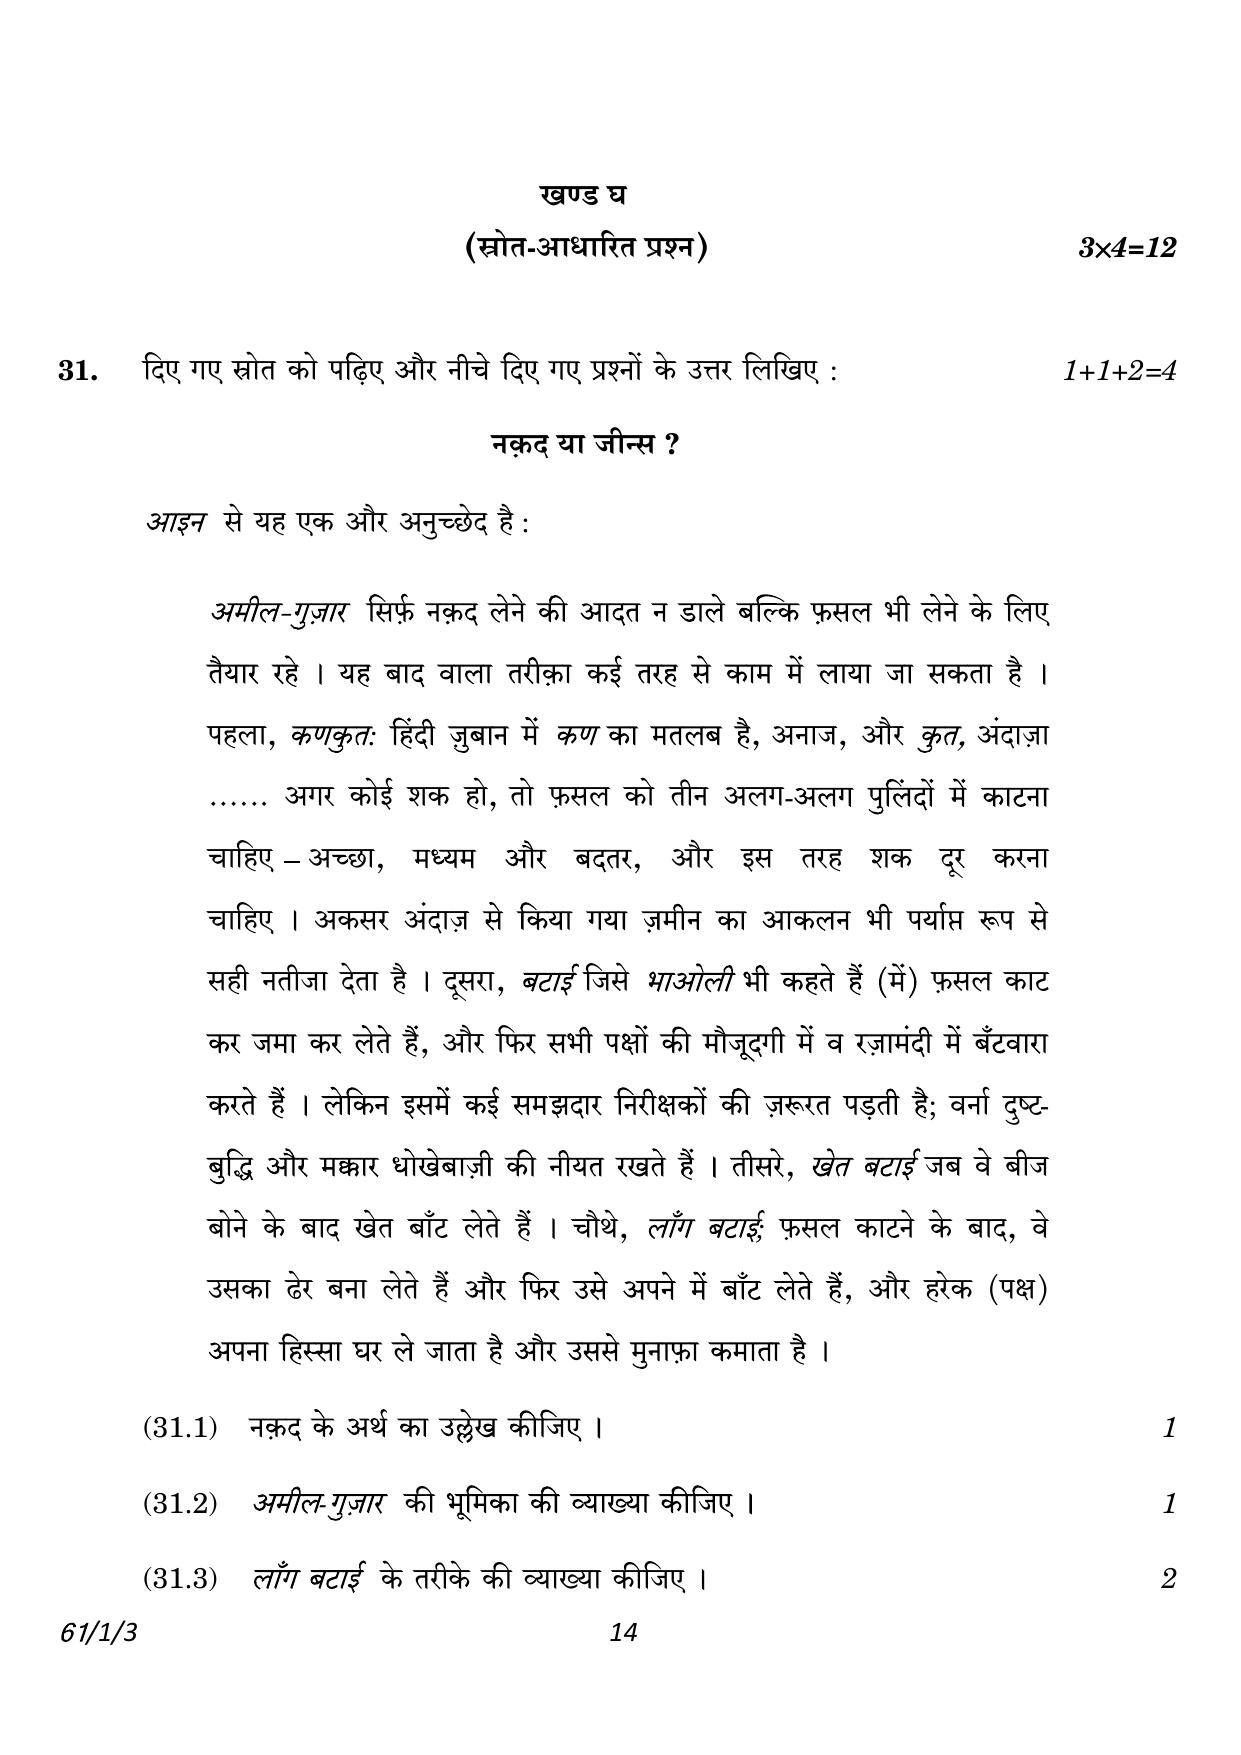 CBSE Class 12 61-1-3 History 2023 Question Paper - Page 14